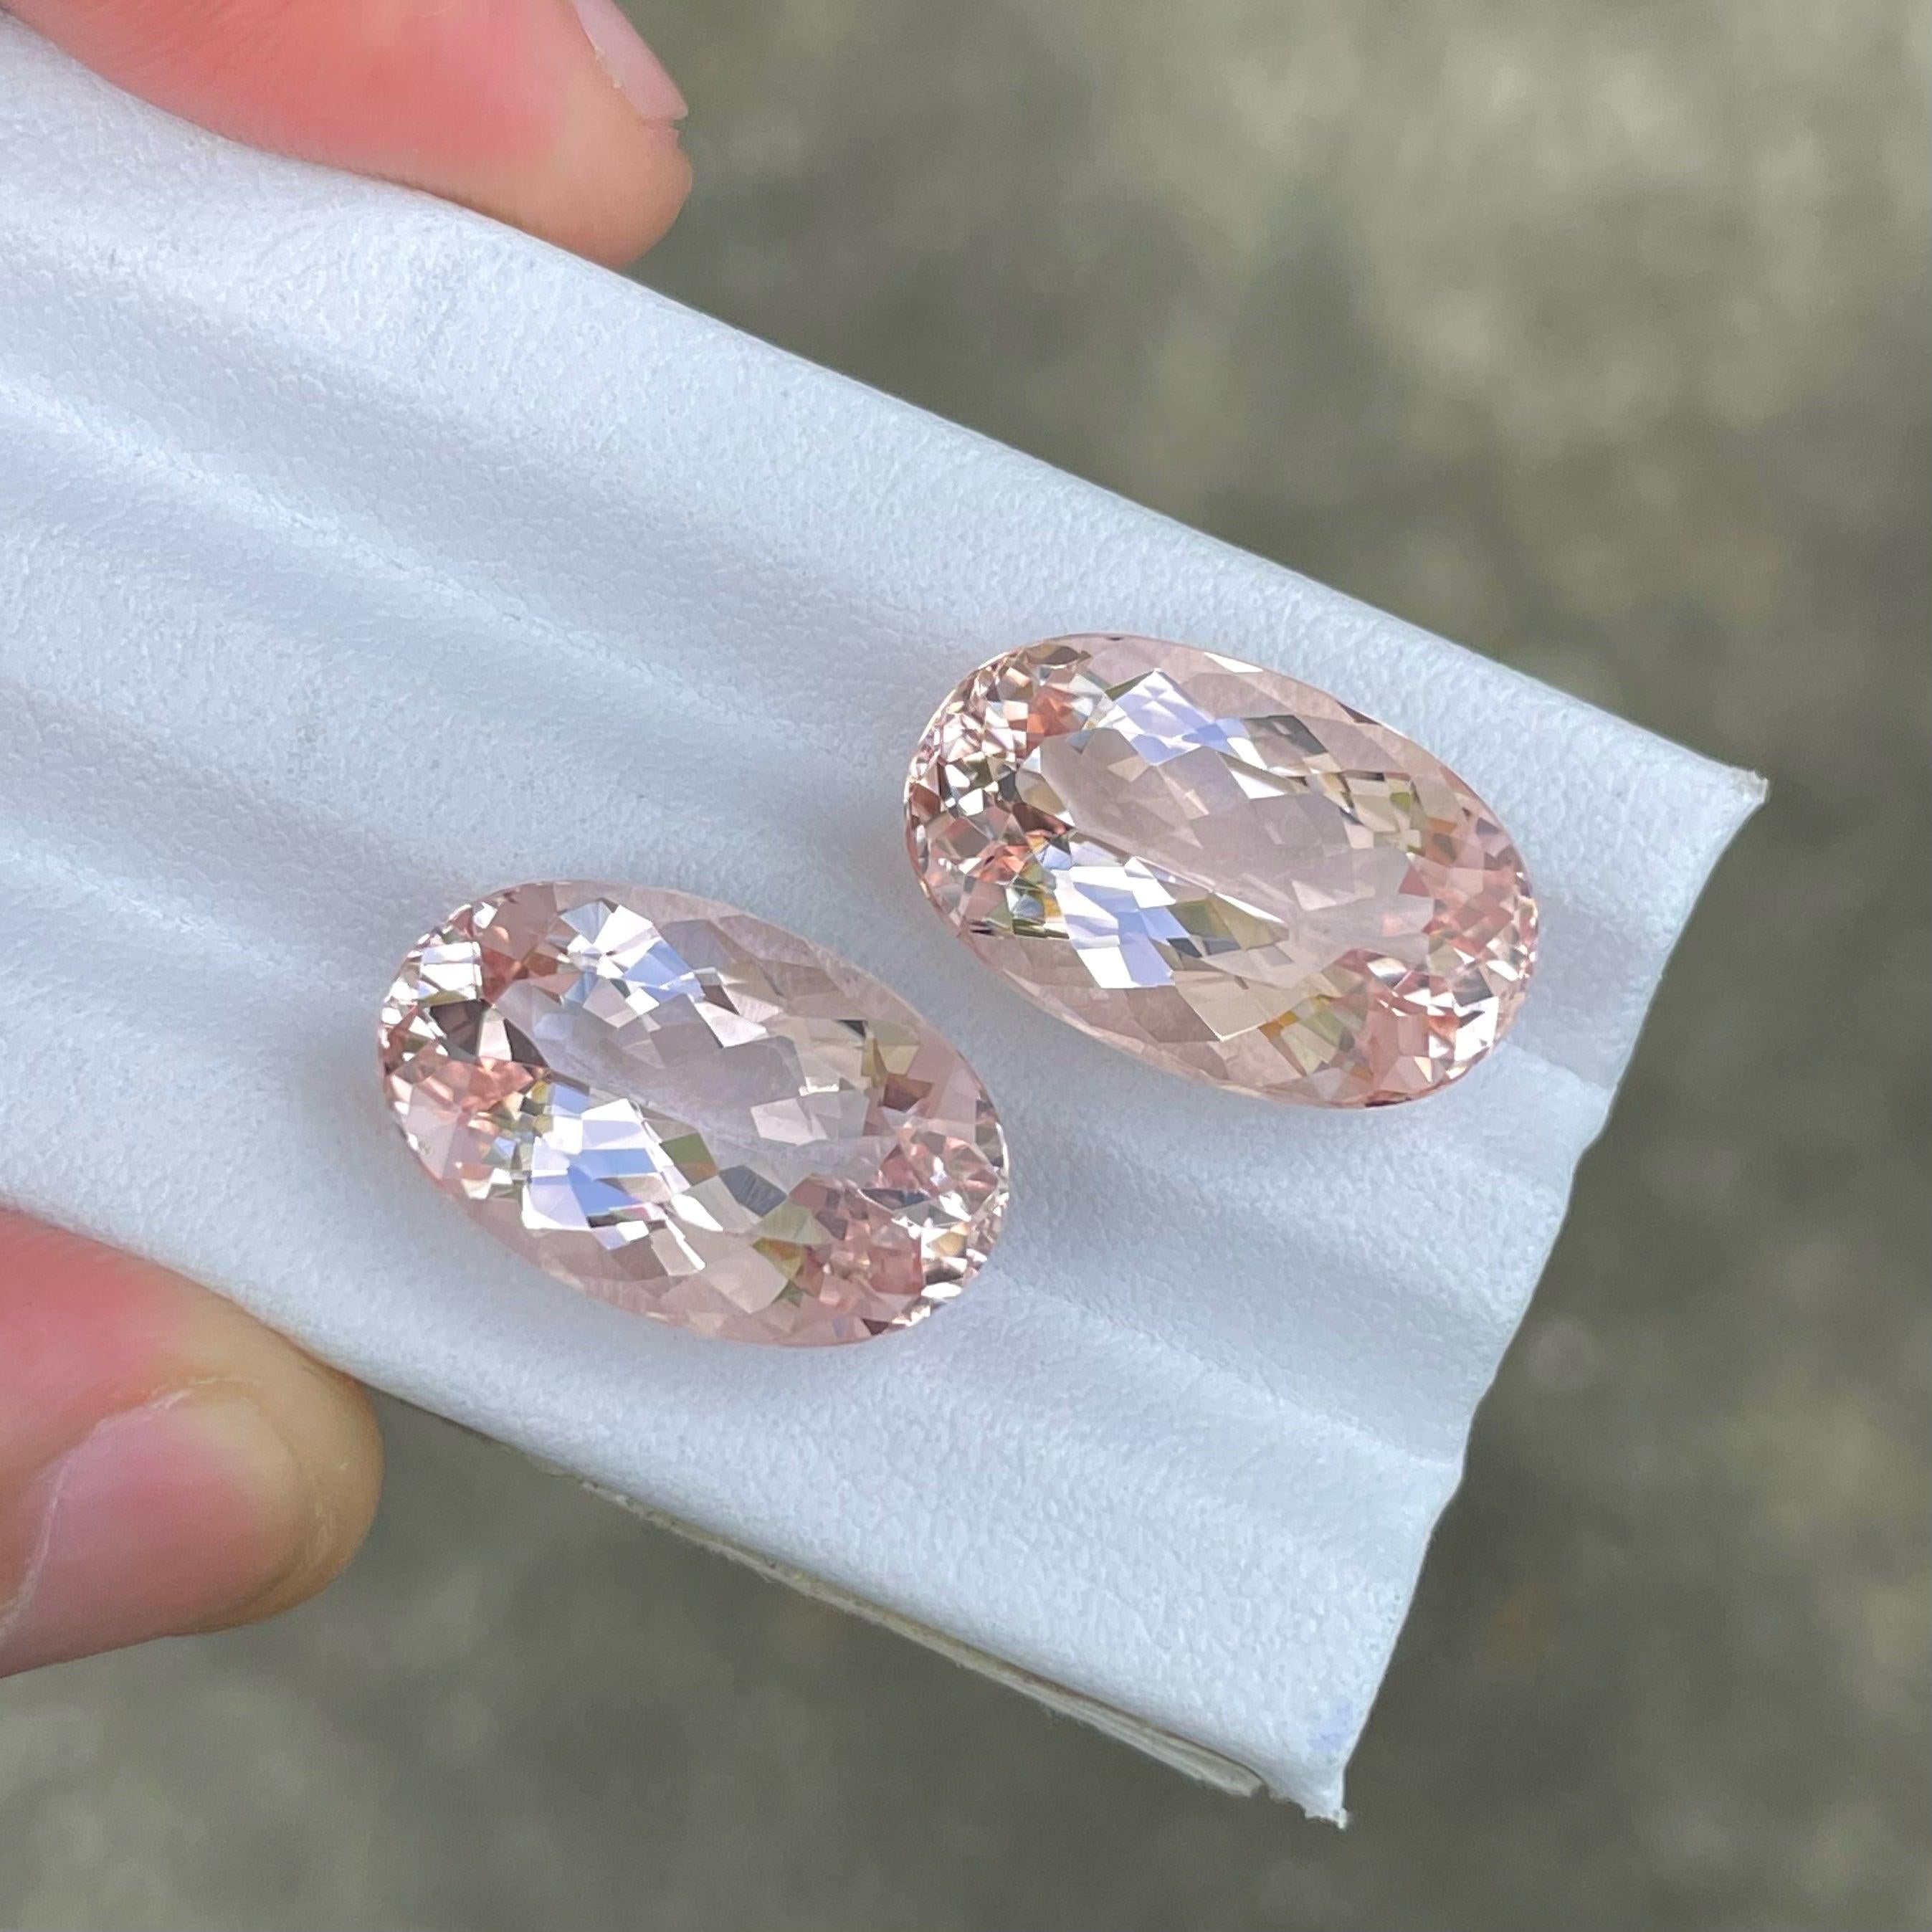 what color is morganite stone